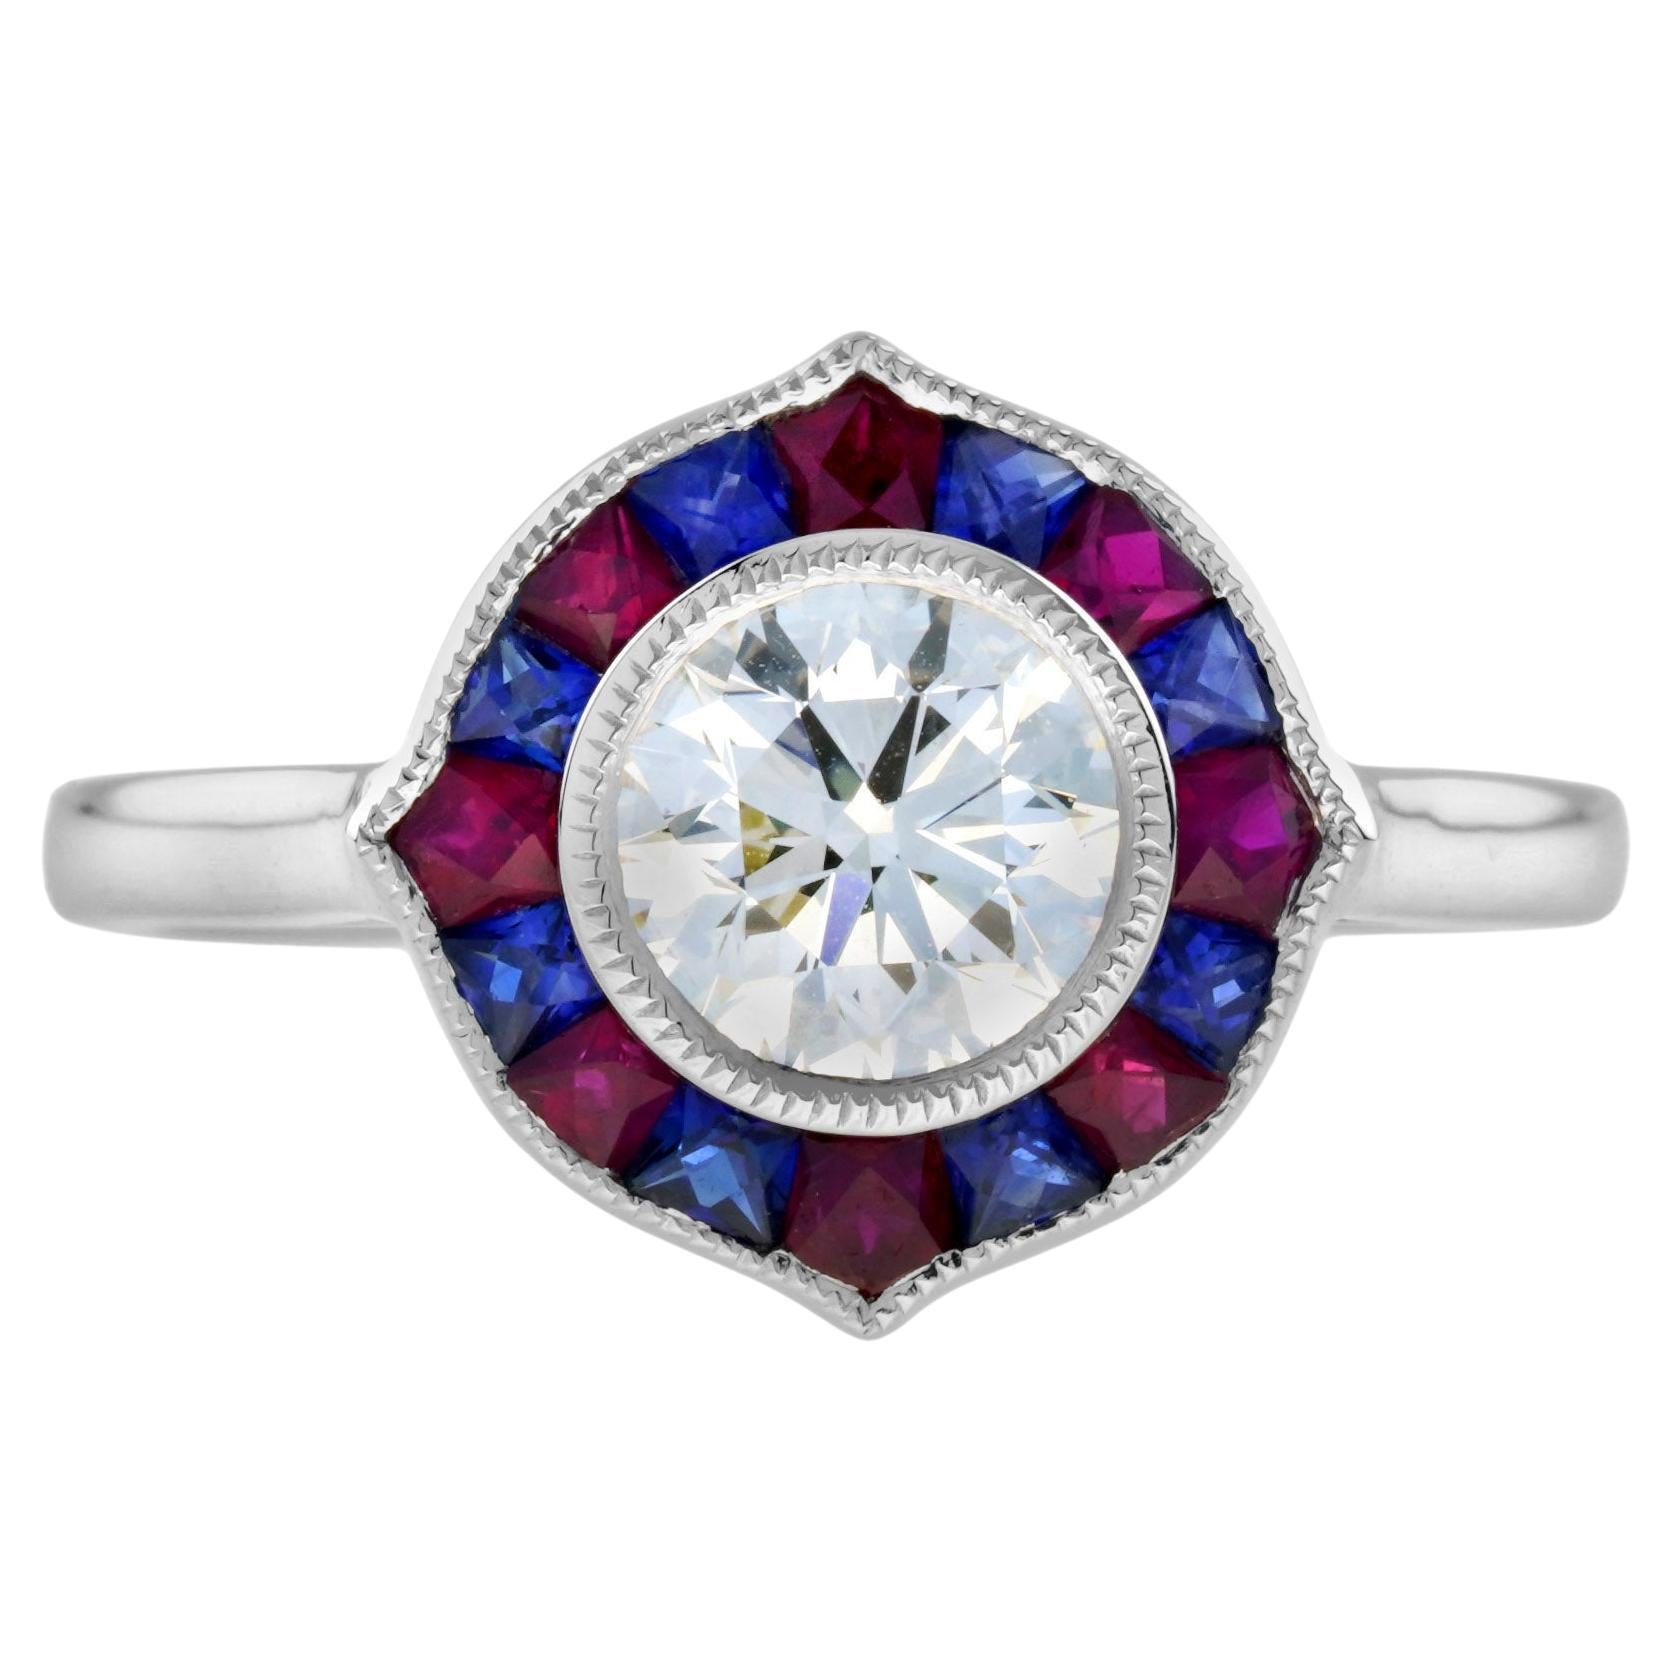 GIA Diamond with Ruby and Sapphire Art Deco Style Engagement Ring in Platinum